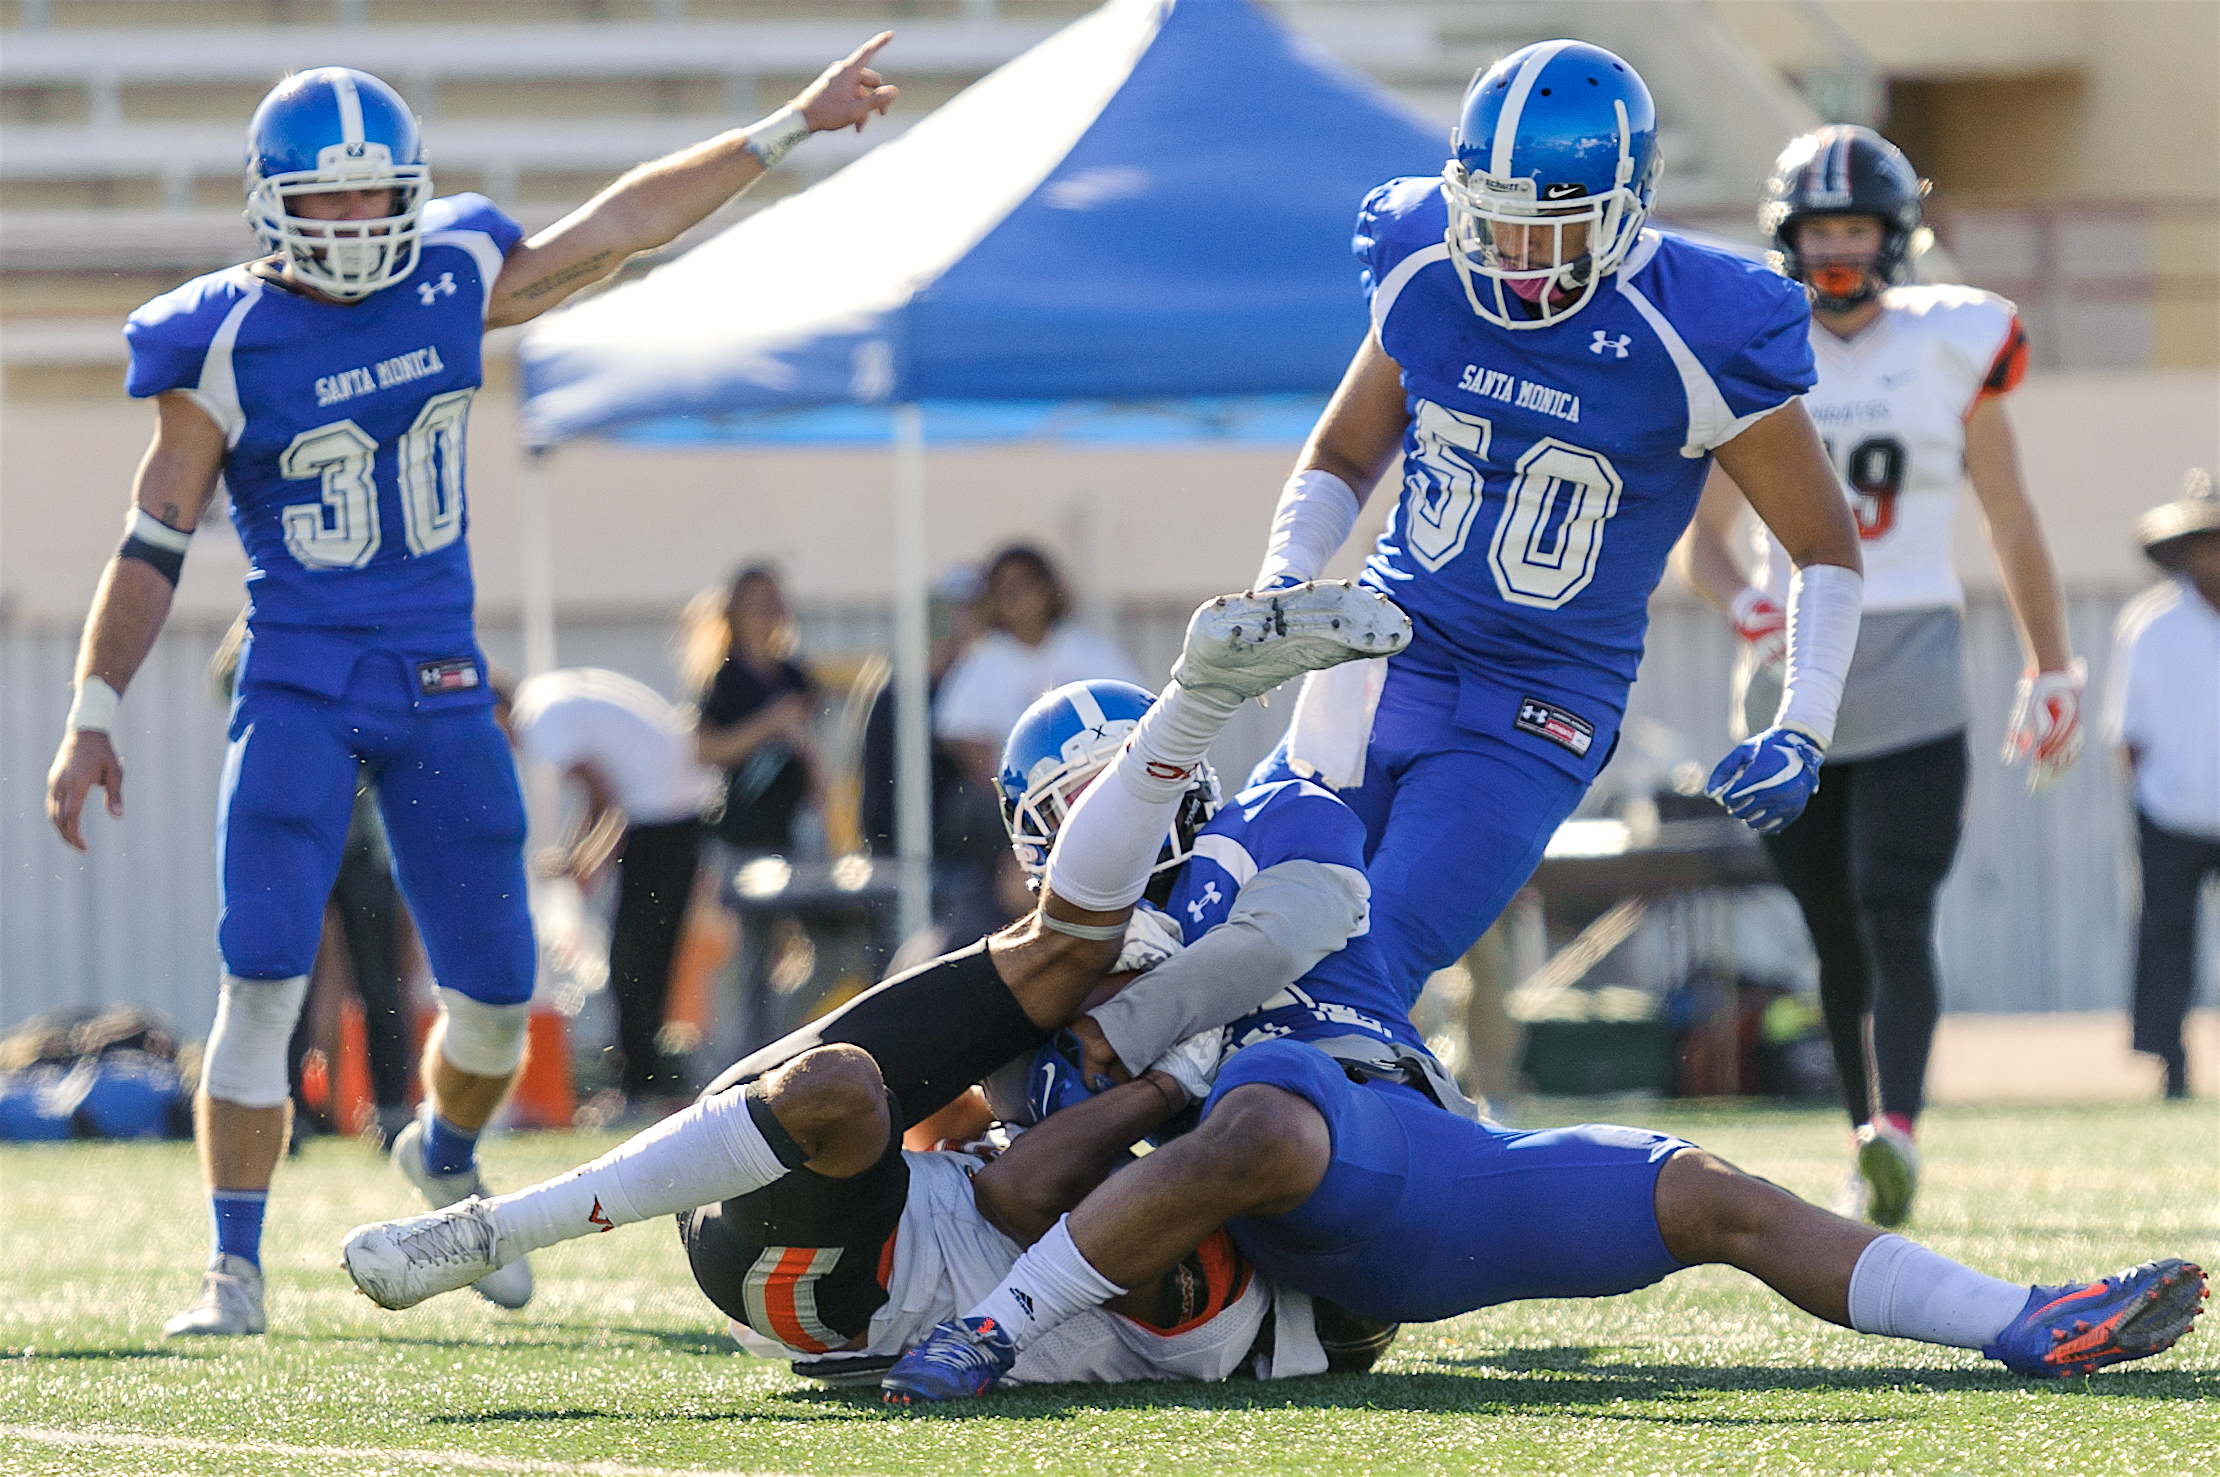  The Corsair defense intercepts a pass at the endzone, preventing a touchdown for Ventura College. The Santa Monica College Corsairs lose to the Ventura College Pirates 0-55. The game was held at the Corsair Stadium at the Santa Monica College Main C